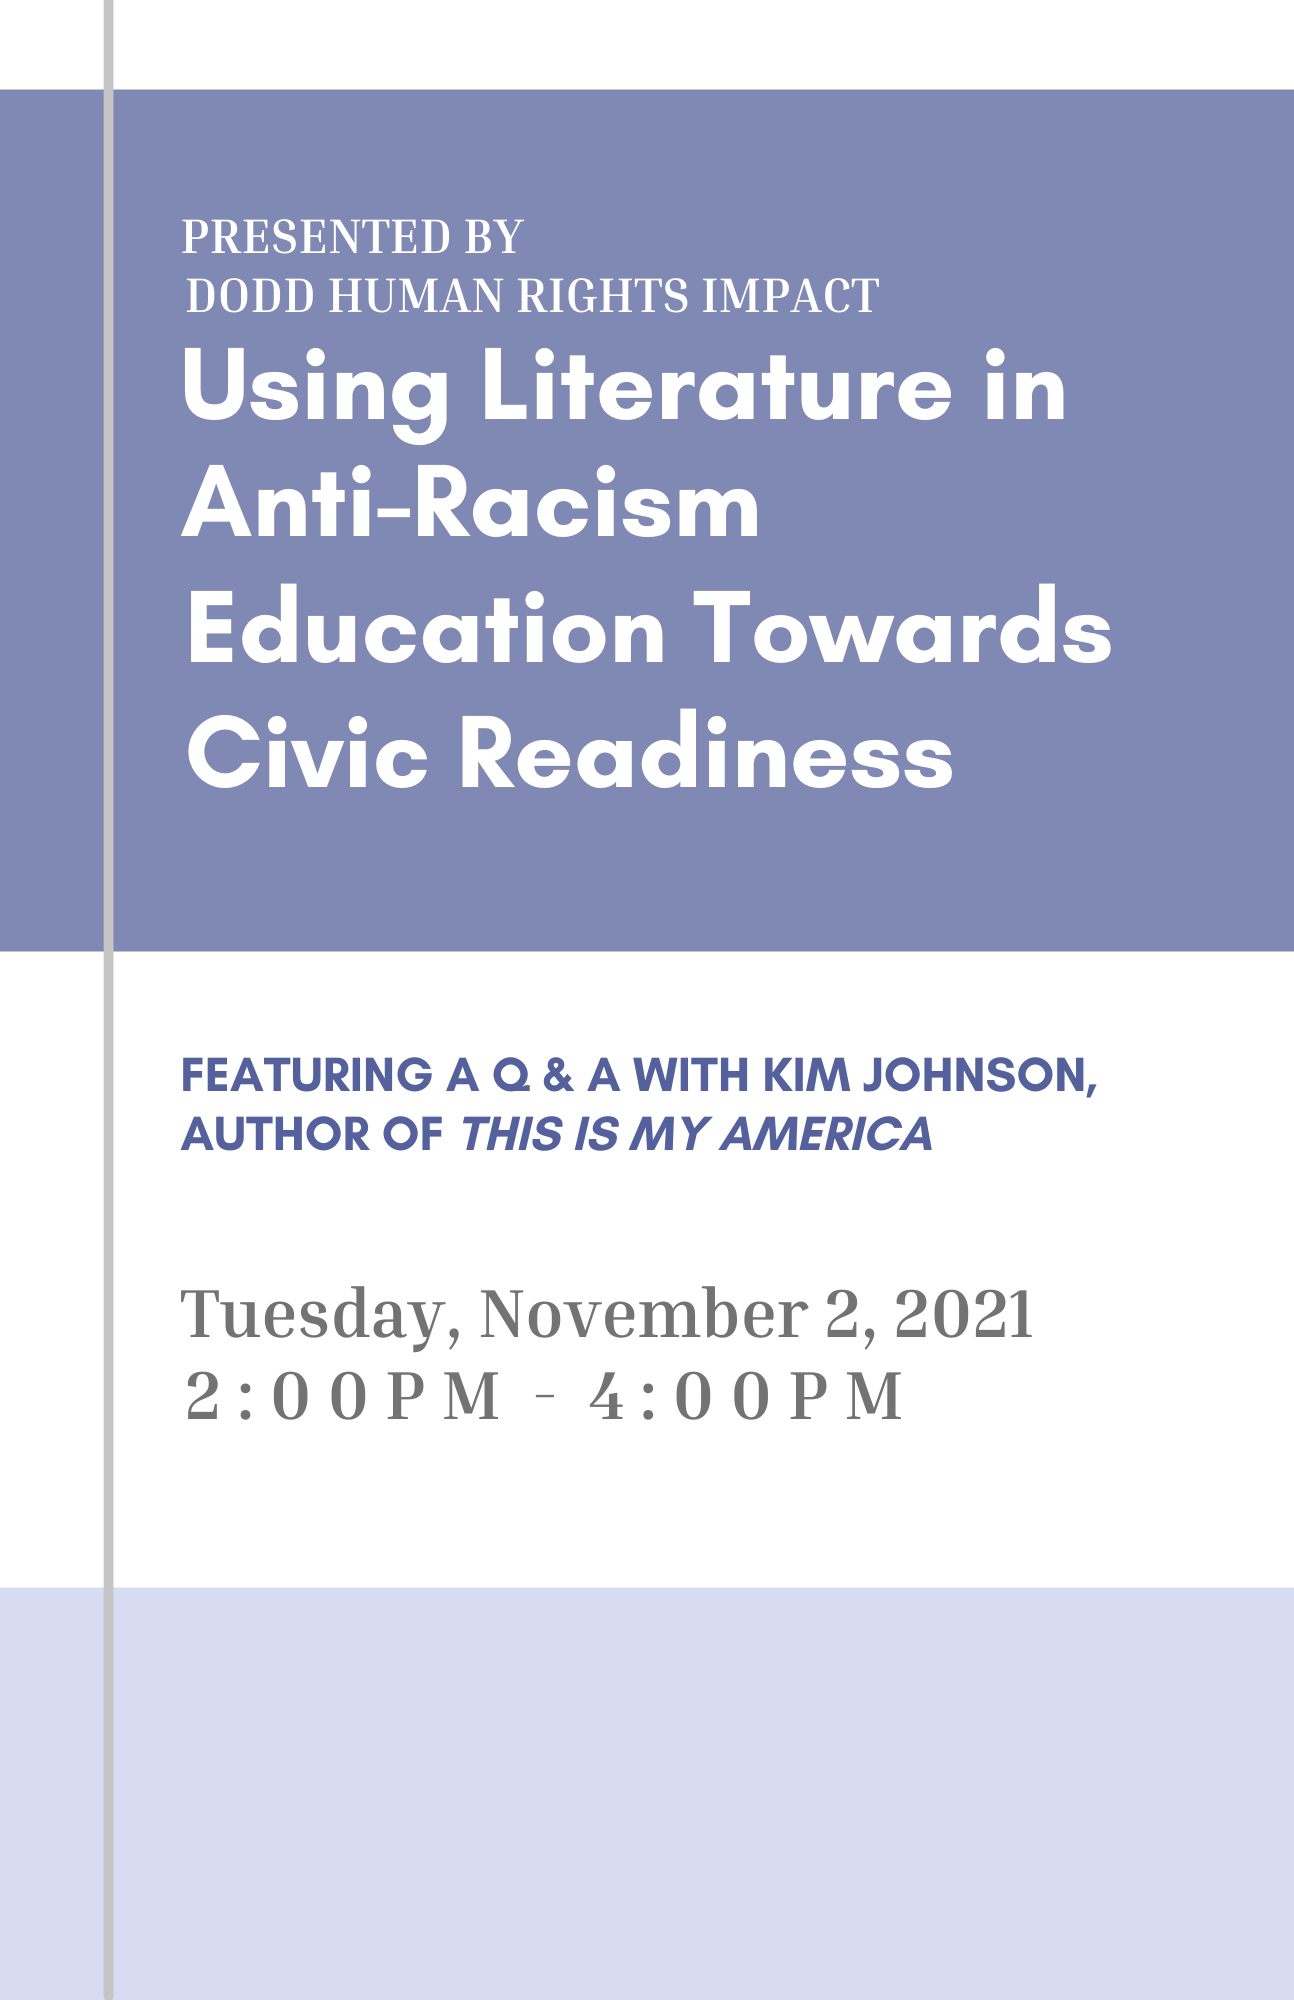 Using Literature in Anti-Racism Education Towards Civic Readiness